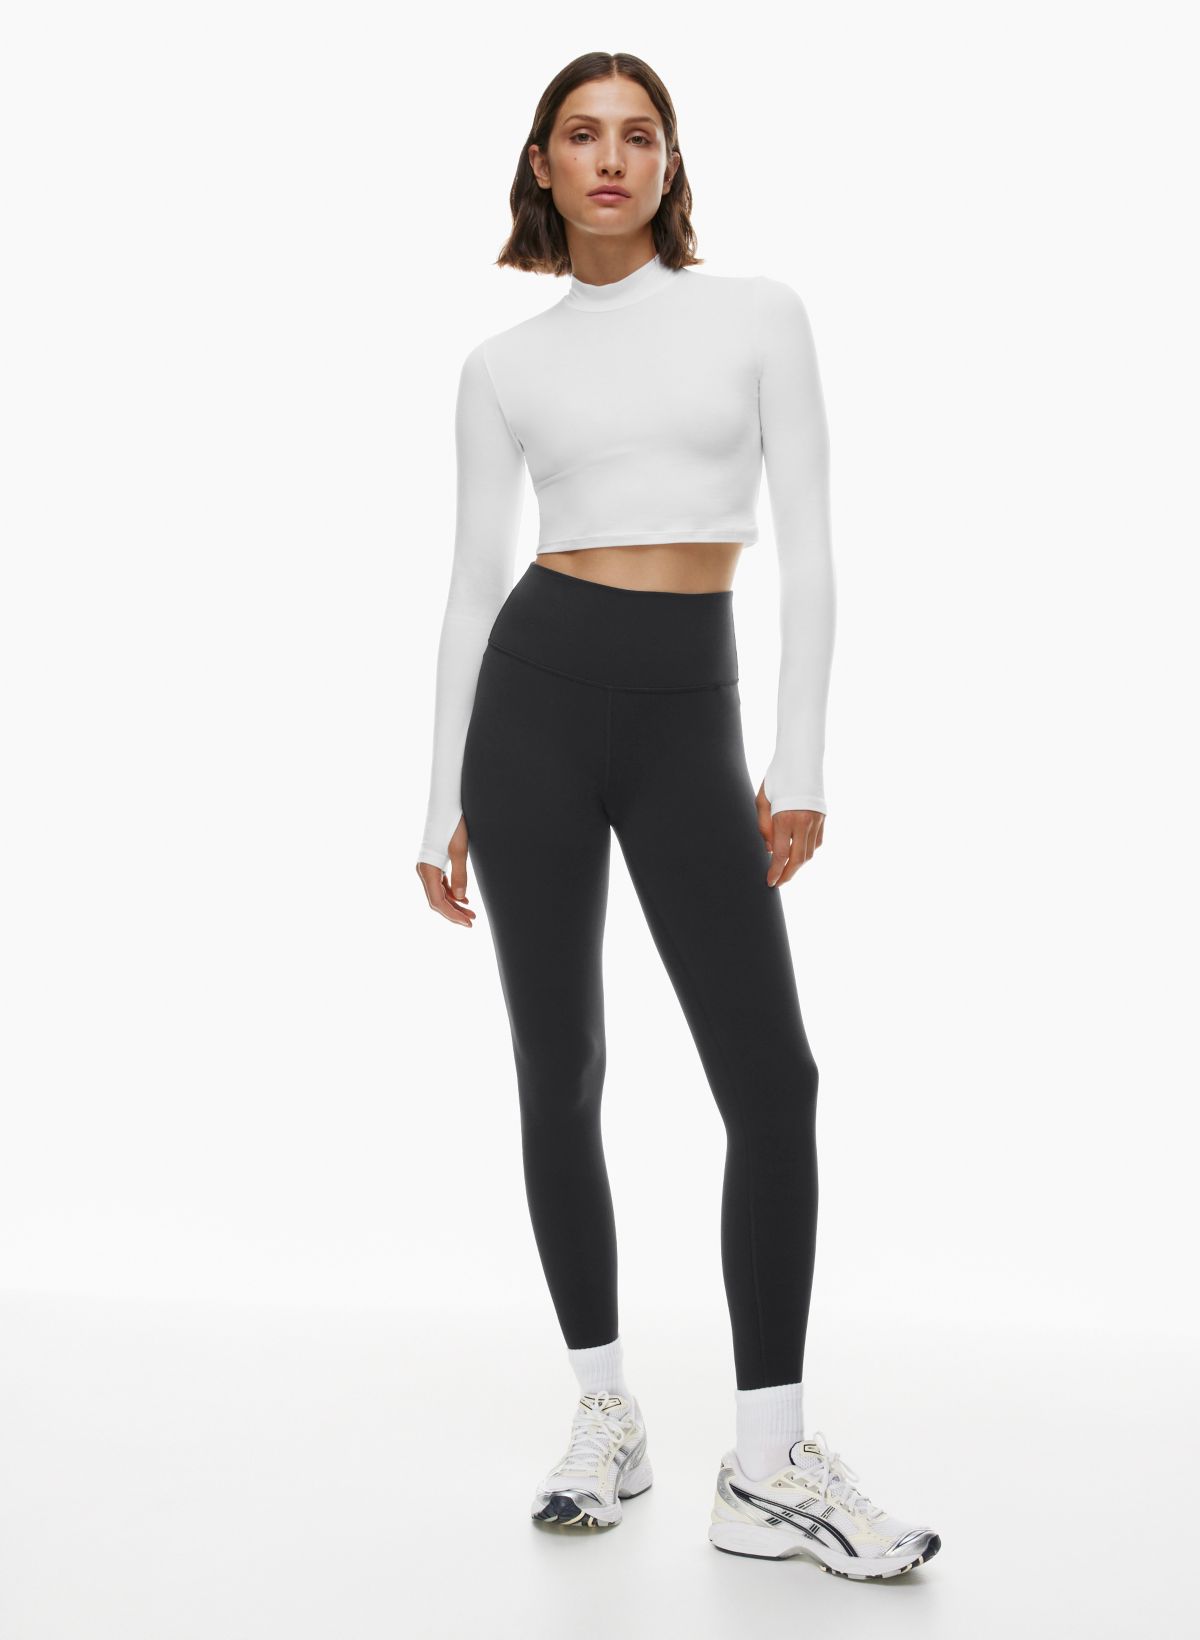 Four Outfits With a Black Sweater or Black Butter Top